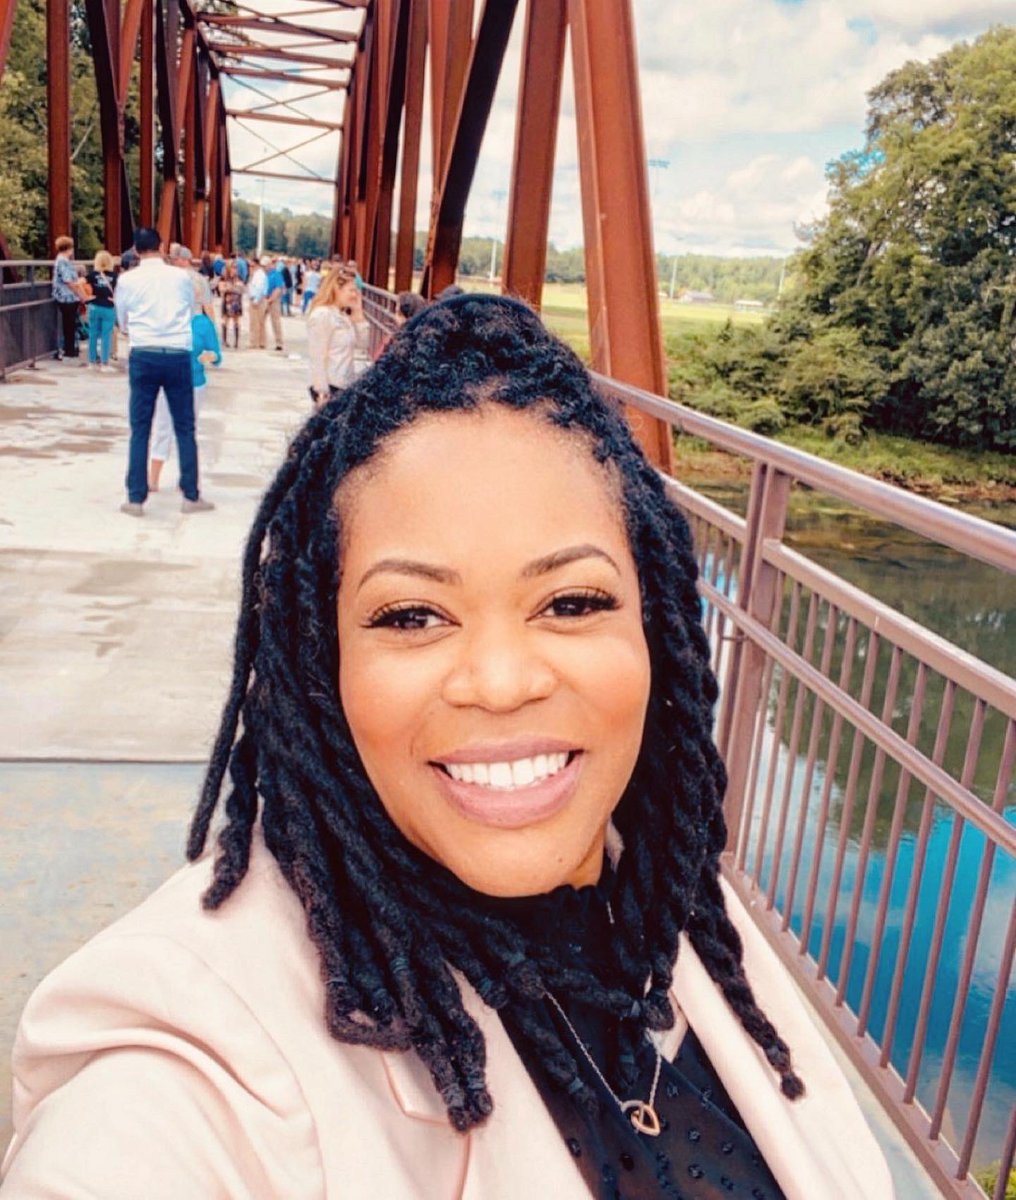 What an amazing day of #bridgebuilding this week at the ribbon cutting of the new Rogers Bridge connecting Duluth to Johns Creek! It was so good to see the lovely Gwinnett County Chairwoman Nicole Love-Hendrickson in attendance!  #community #connections #history #womenleaders